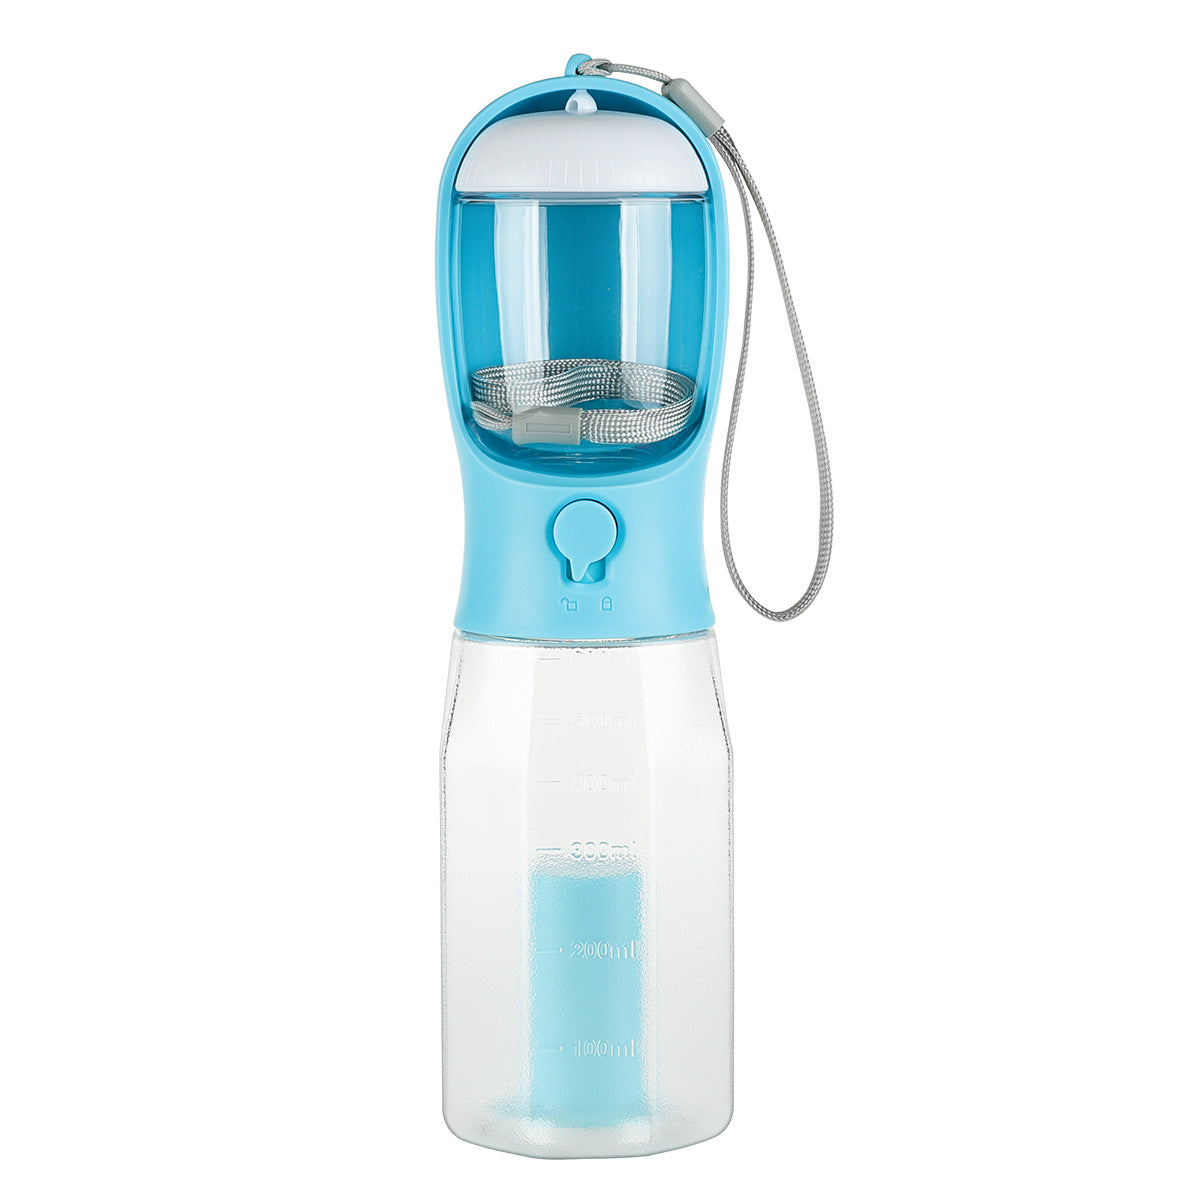 This 3-in-1 Dog Water Bottle, Food Storage, and Waste Bag Holder is a must-have for any pet owner. It is a convenient and easy-to-use accessory for pet owners and allows you to provide your pet with food and water while traveling, hiking, or enjoying outdoor activities. Waste bag storage compartment makes clean up on-the-go a breeze.